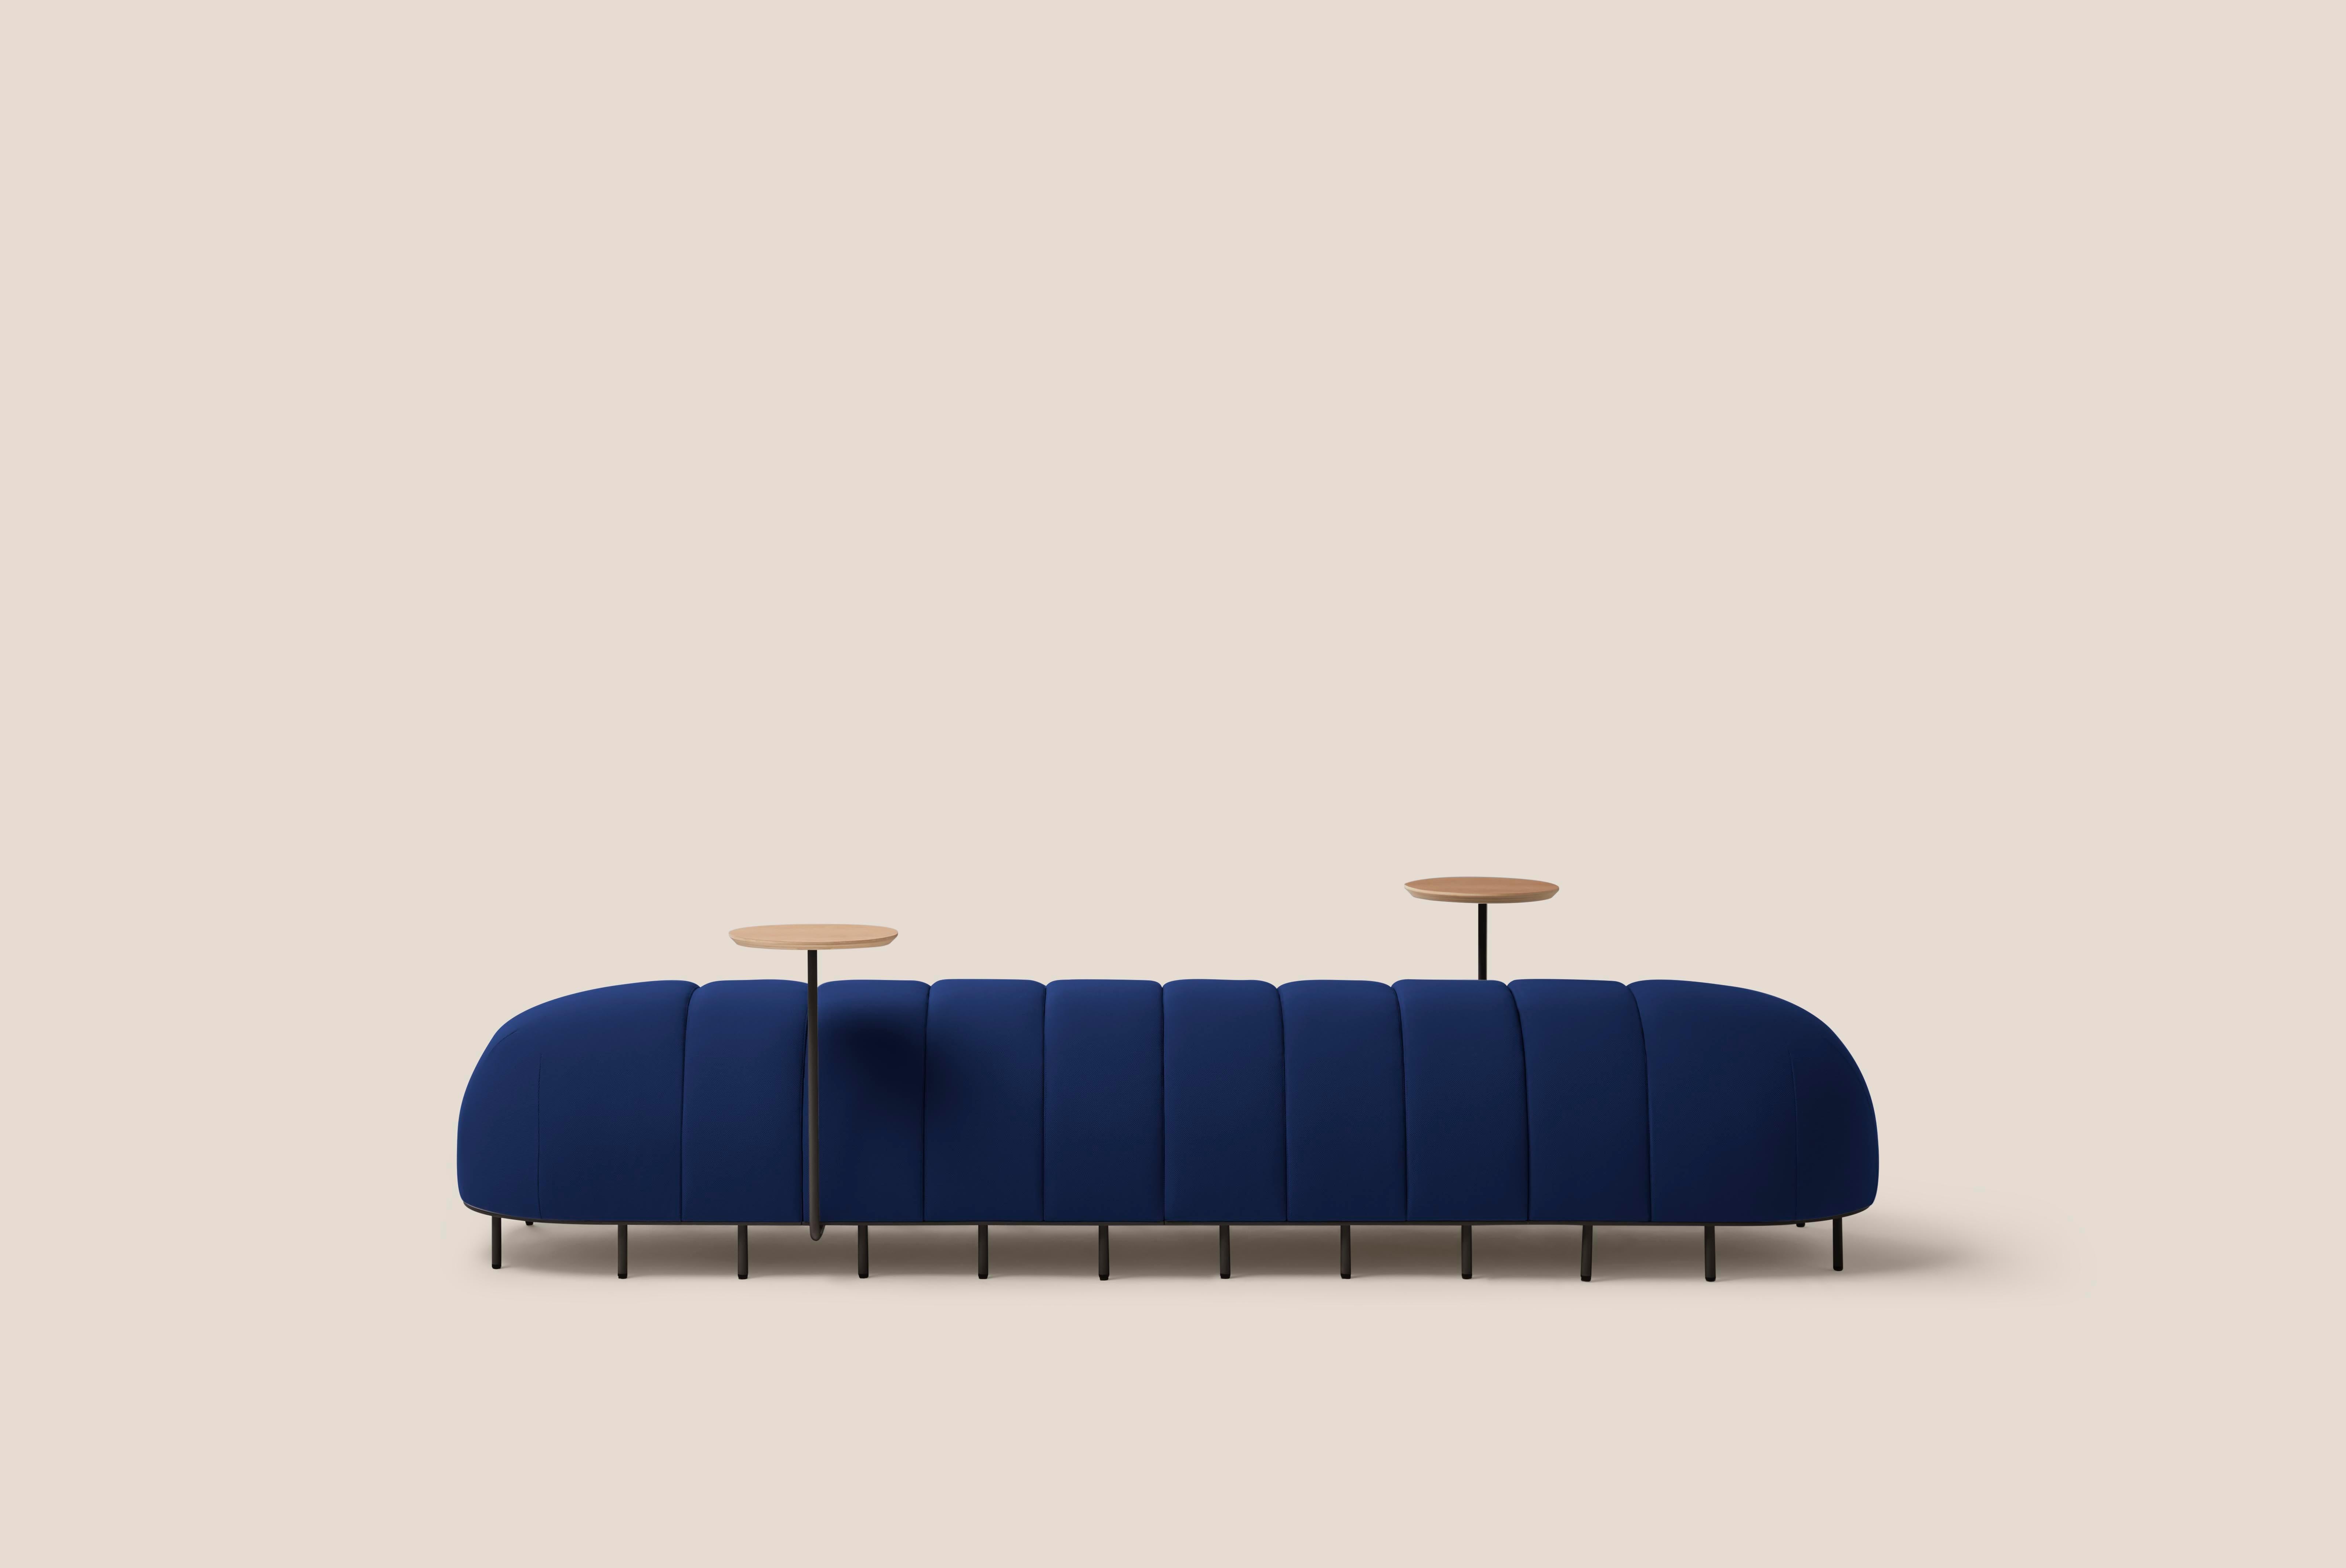 Dark blue worm Bench VI by Pepe Albargues
Dimensions: D 65 x W 230 x H 50 cm
Materials: Plywood, foam CMHR, iron
Available in different colors. Custom modules convinations available

2 x straight module
2 x end module
2 x side table

Worm